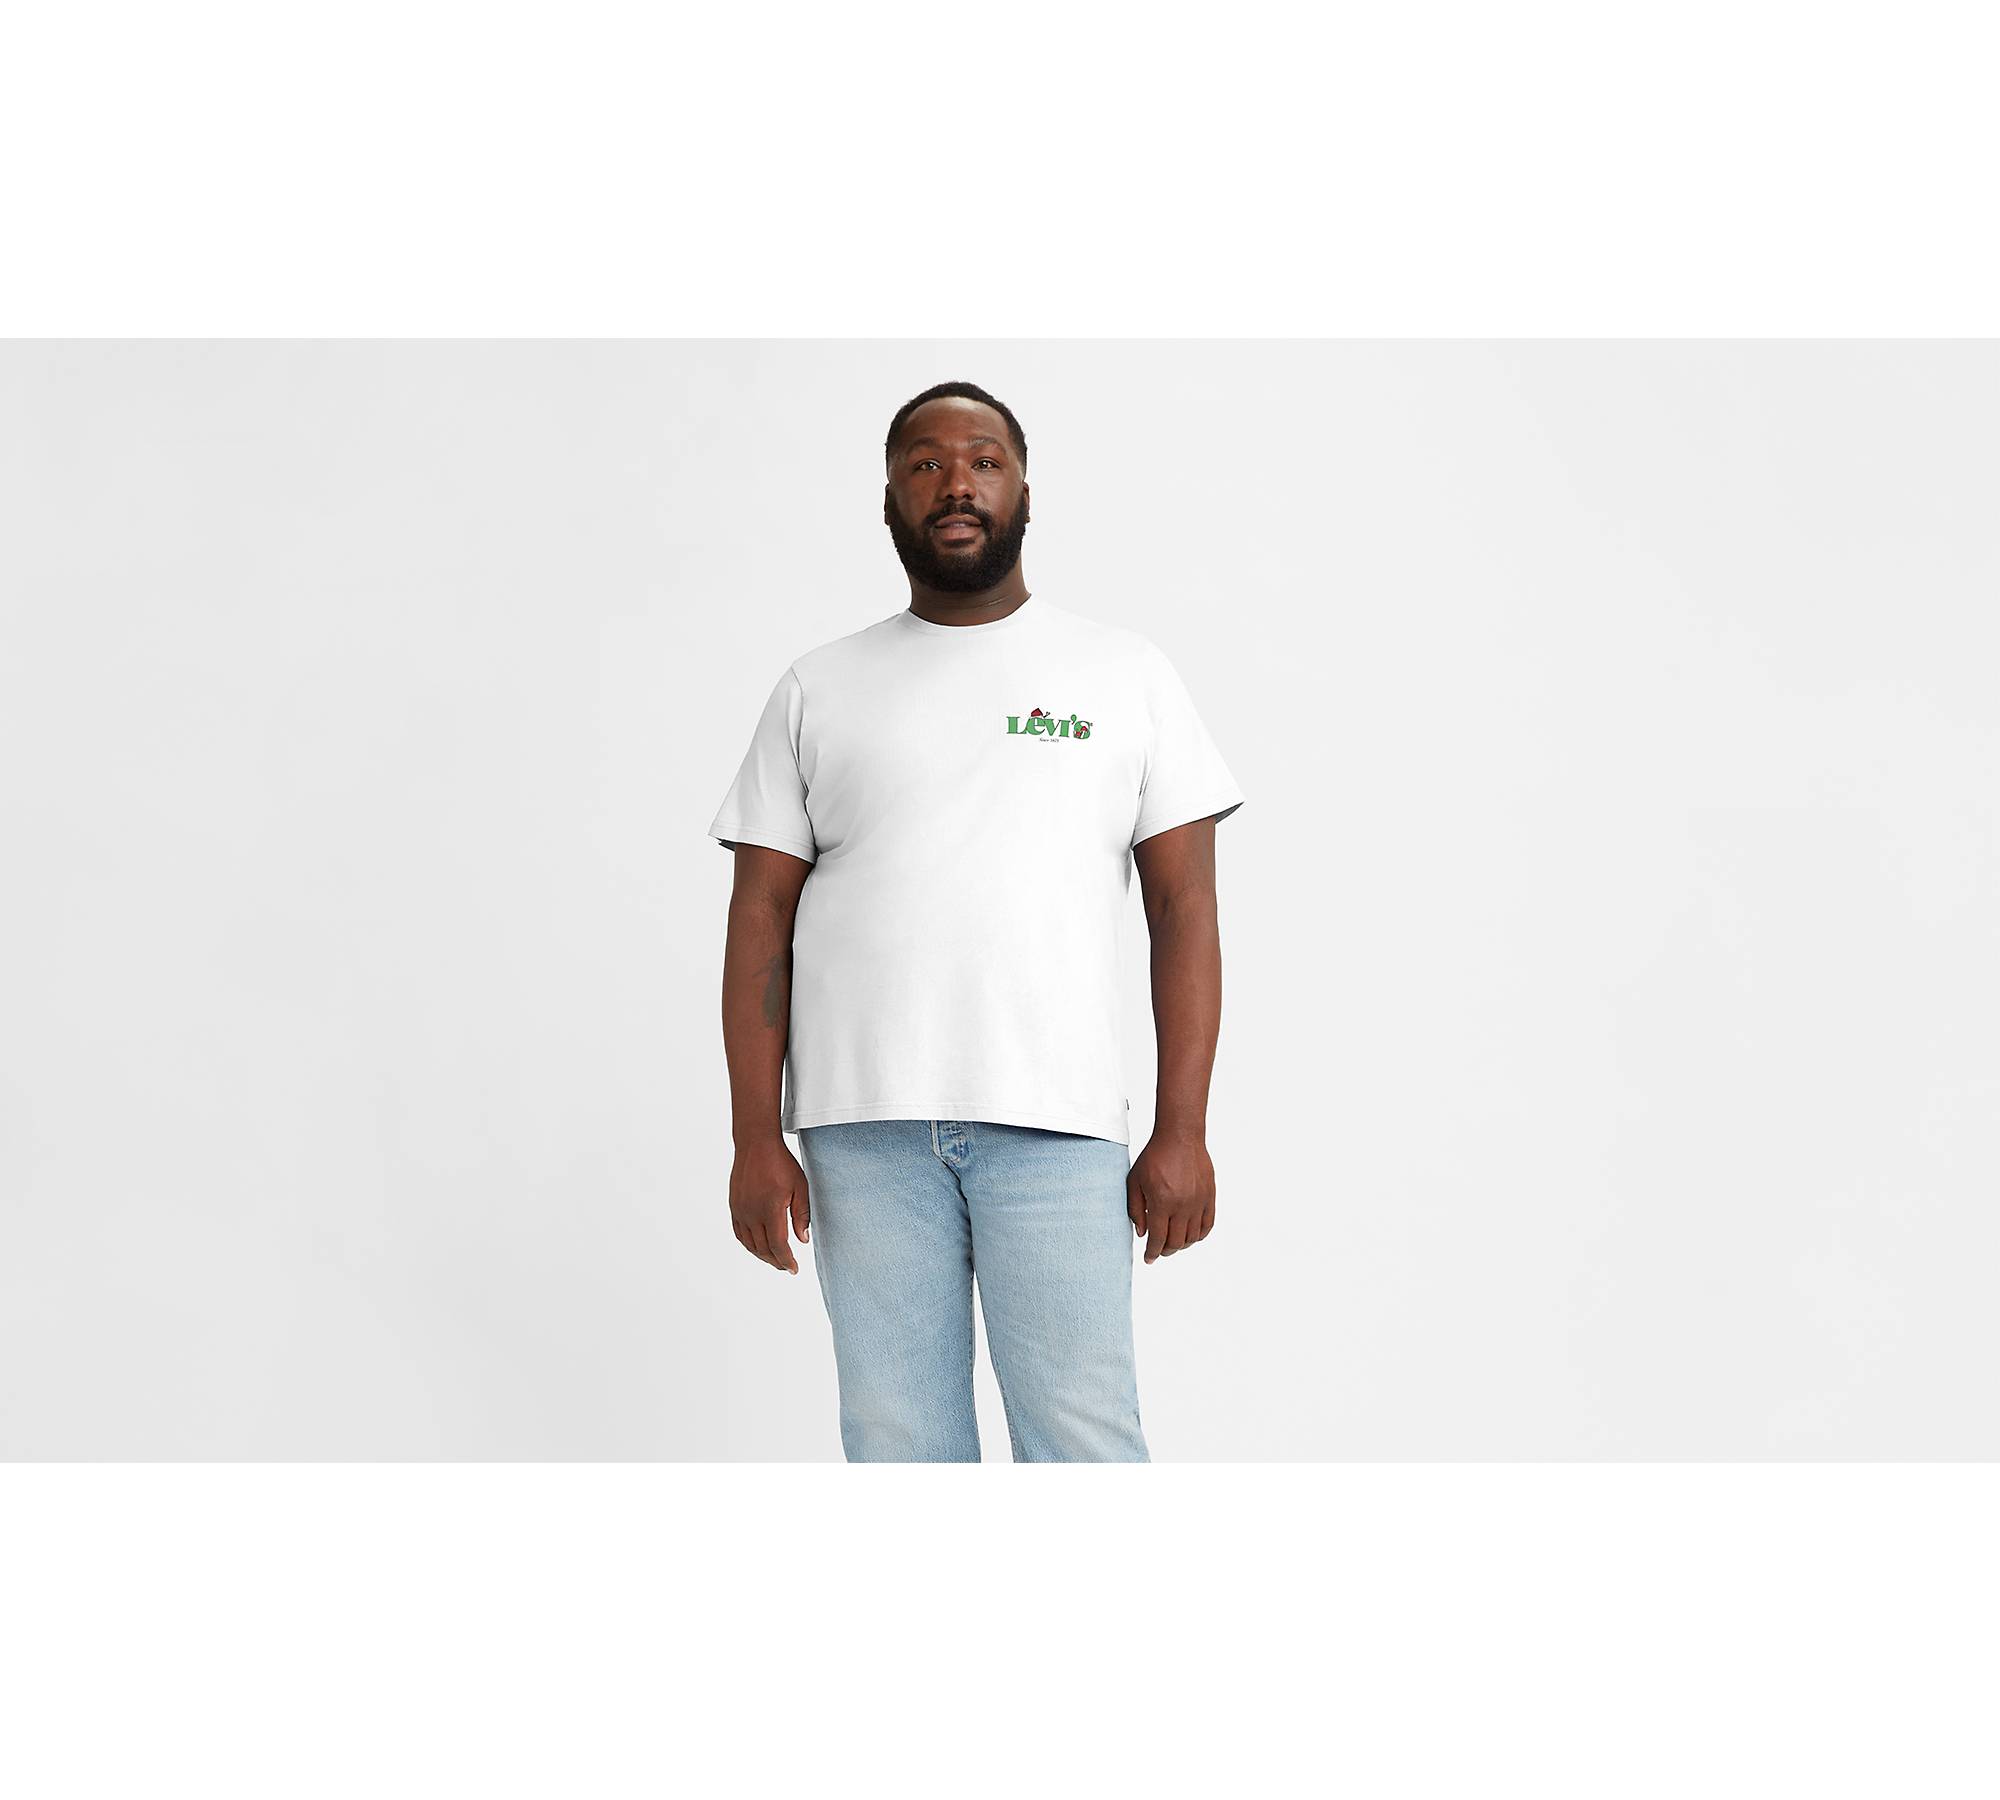 T-Shirt Levis Relaxed Fit Poster Blanc Homme